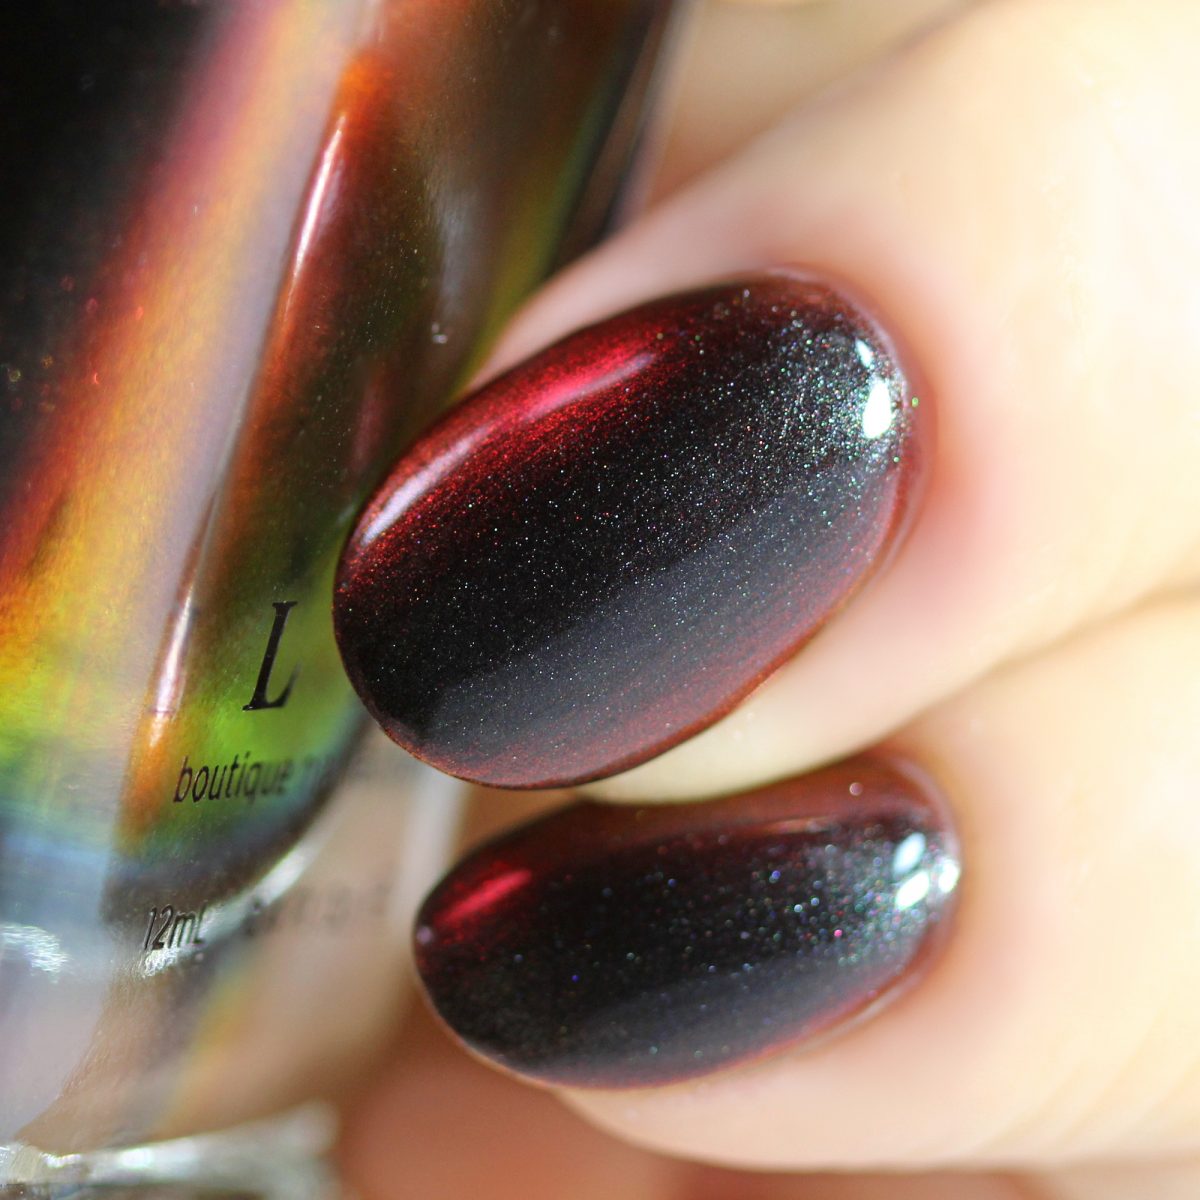 Eclipse - Black to Red Ultra Chrome Nail Polish by ILNP